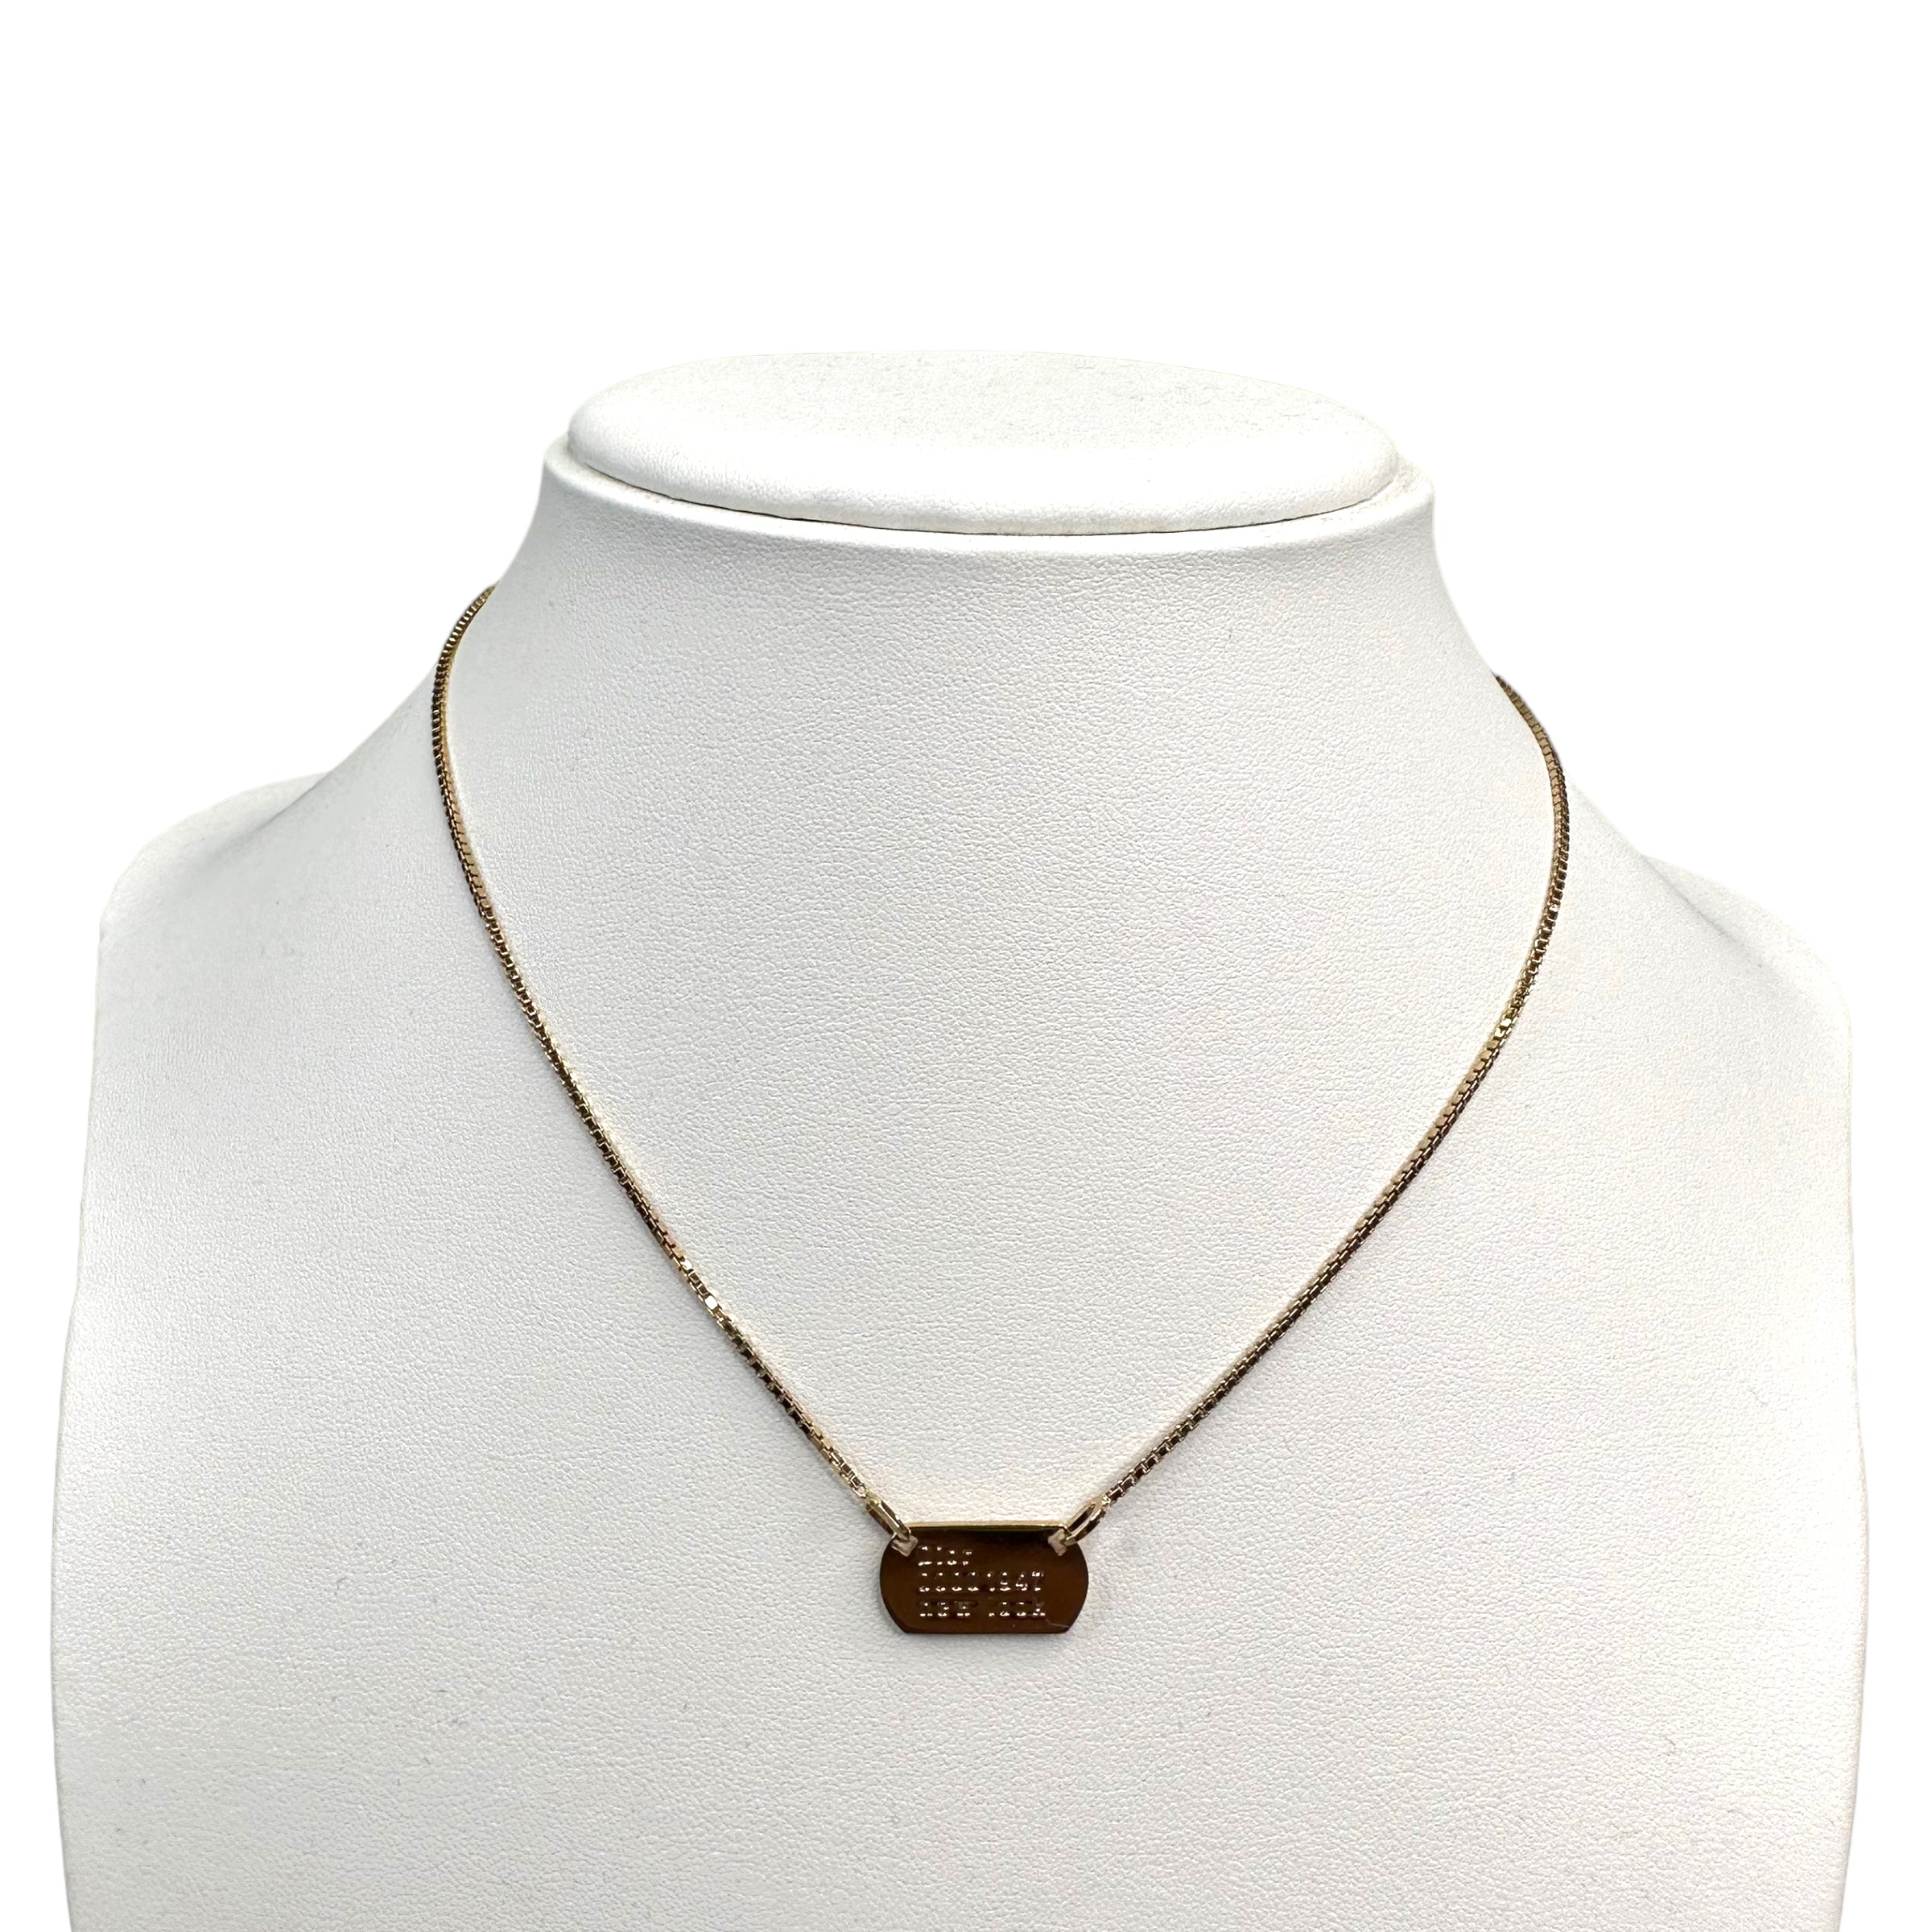 DIOR 'NEW YORK' TAG PENDANT NECKLACE GOLD PLATED